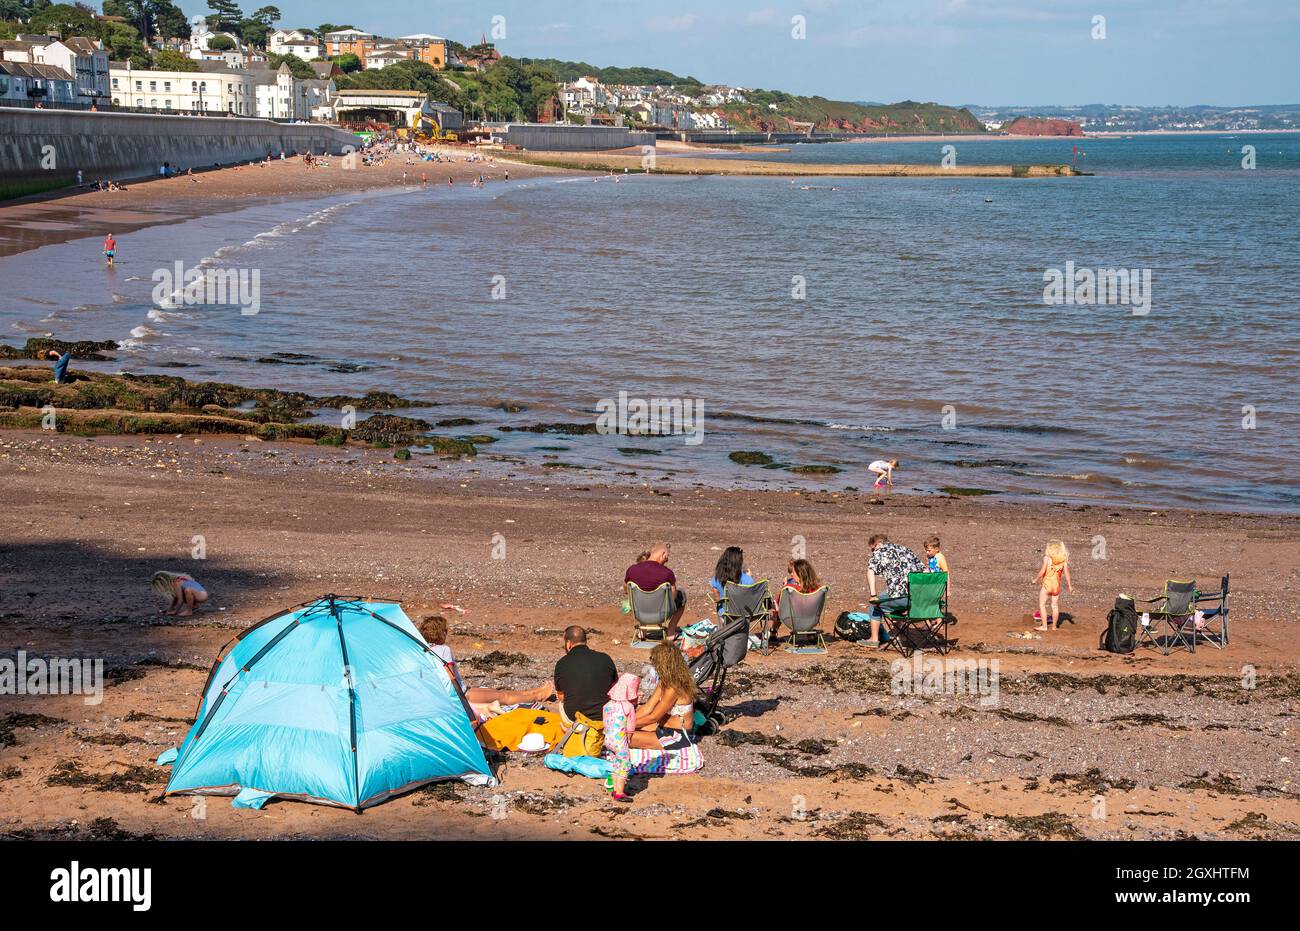 Dawlish, Devon, England, UK. 2021. Families on the beach at low tide in ...